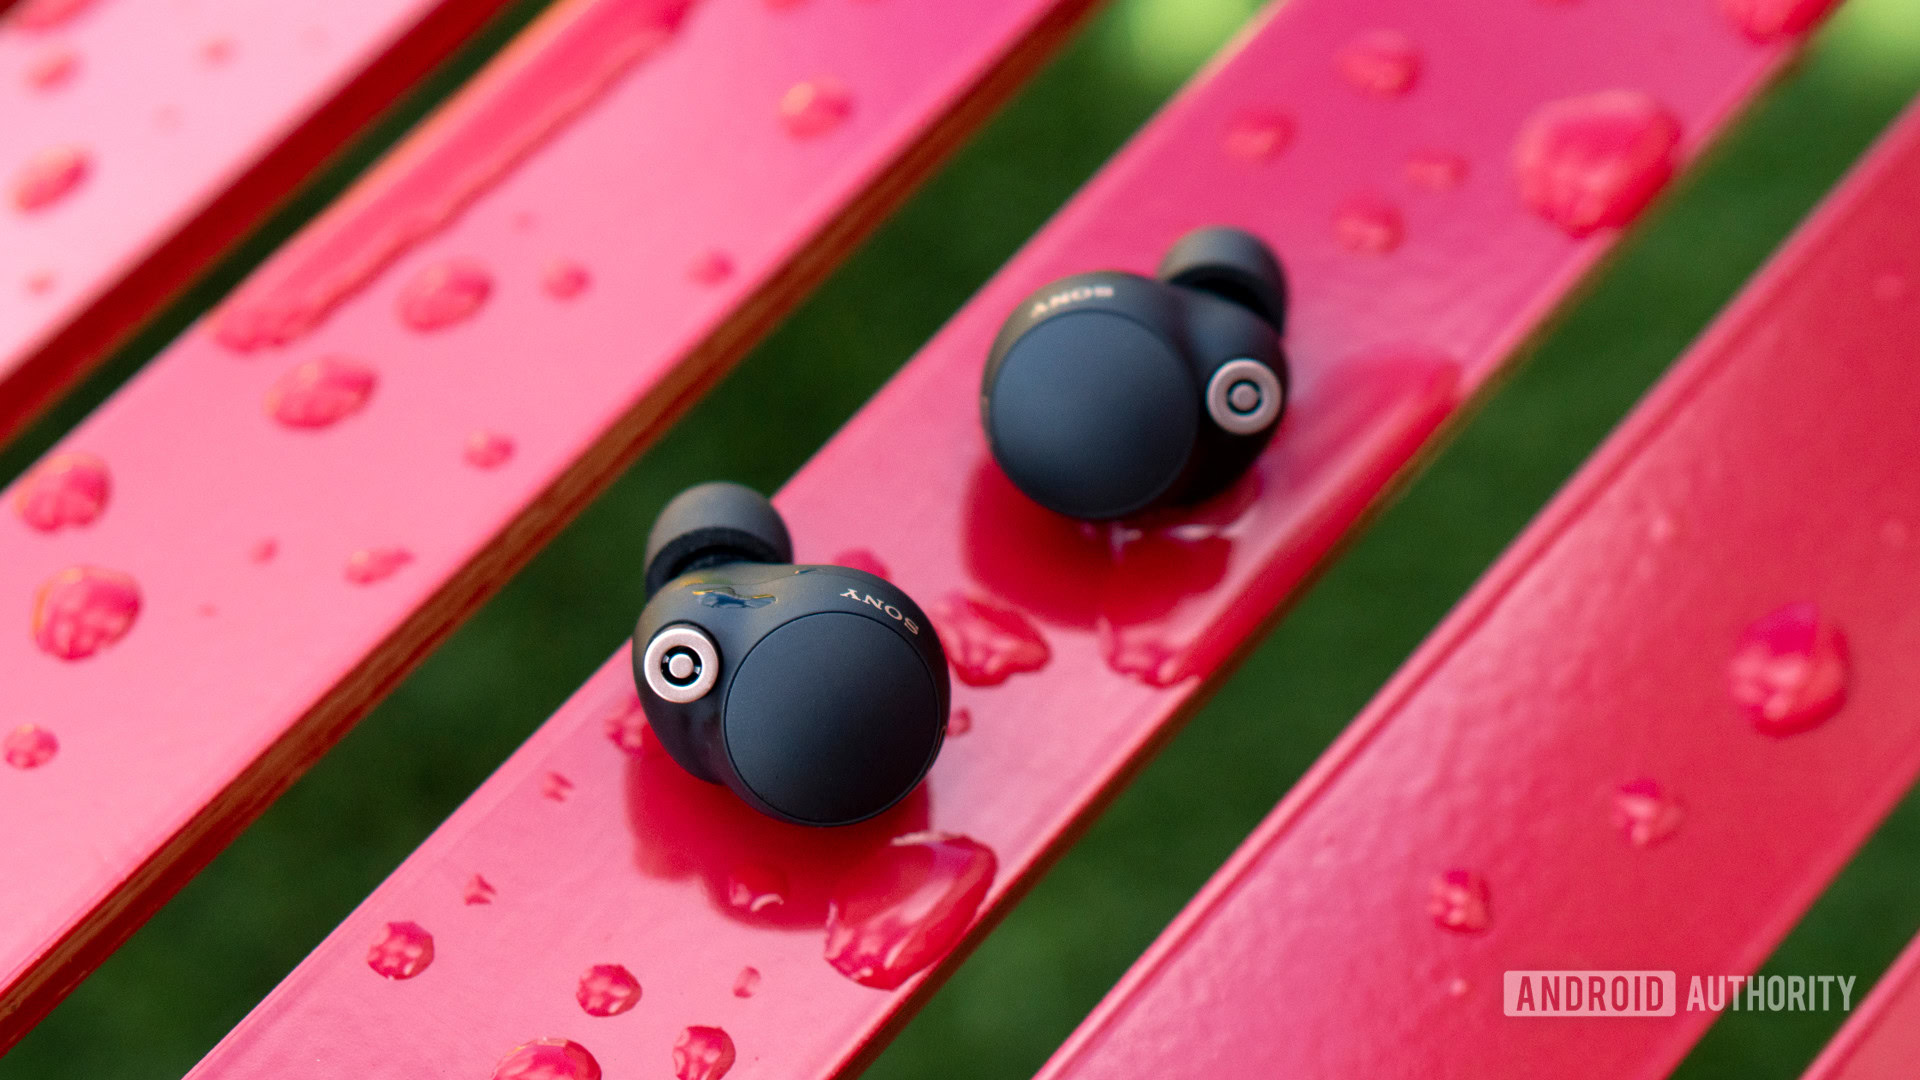 A picture of the Sony WF-1000XM4 earbuds on a wet red bench.